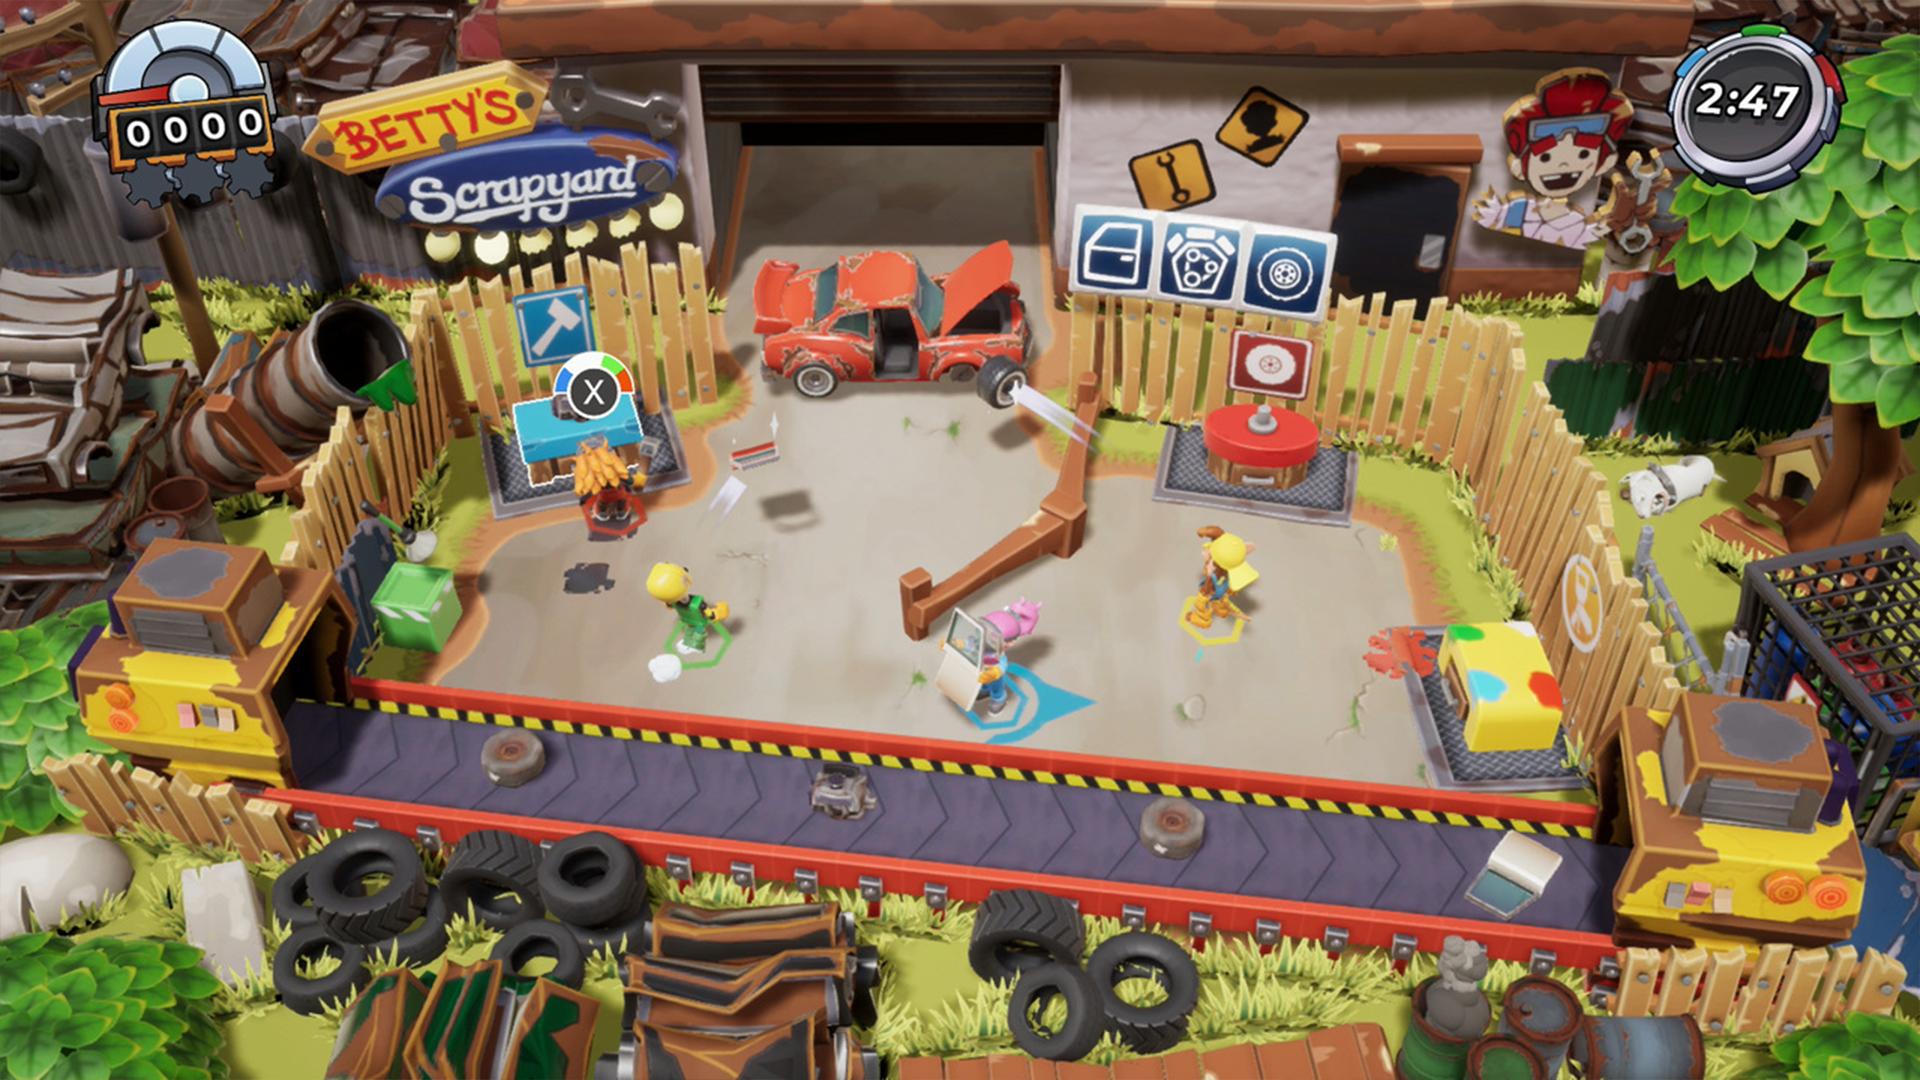 It looks like Sunset Overdrive has 8-player co-op